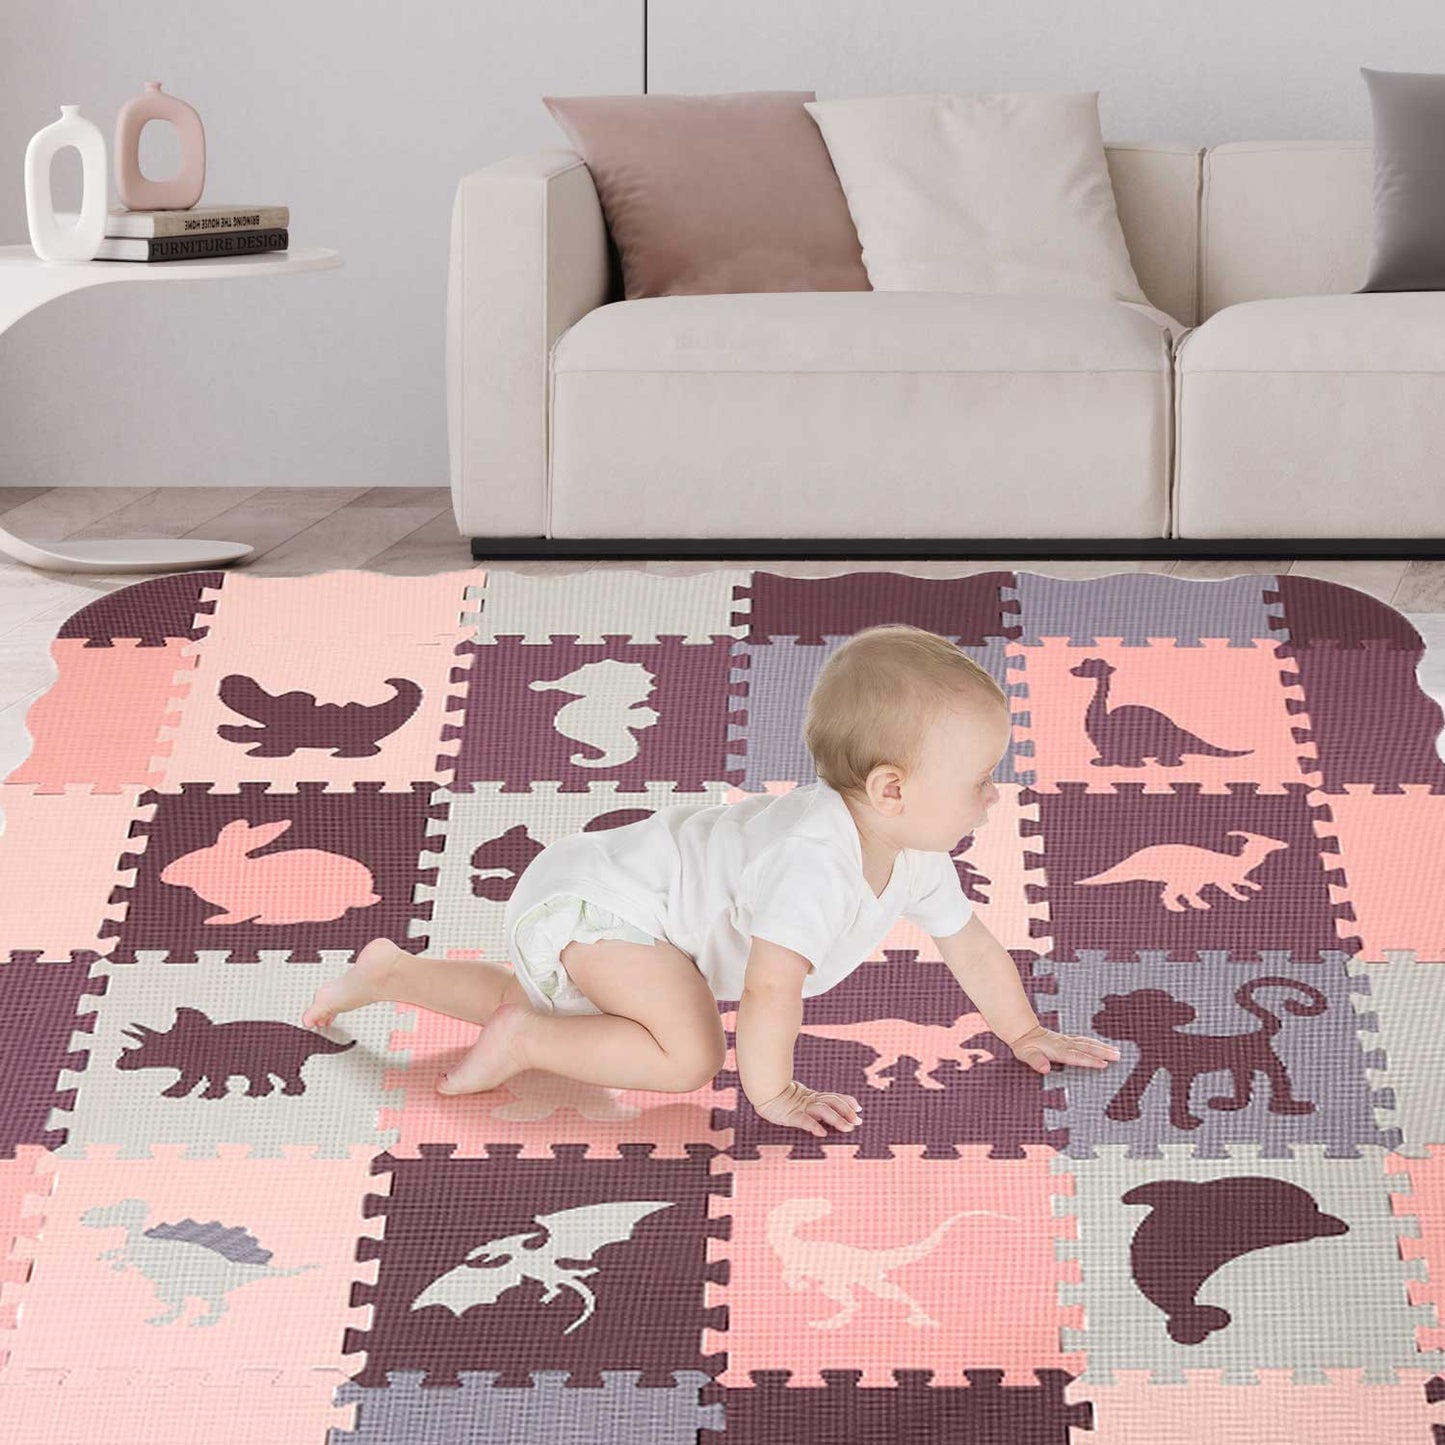 CUTE STONE 56" X 56" Baby Play Mat Floor Mat Foam Puzzle Playmat for Toddlers